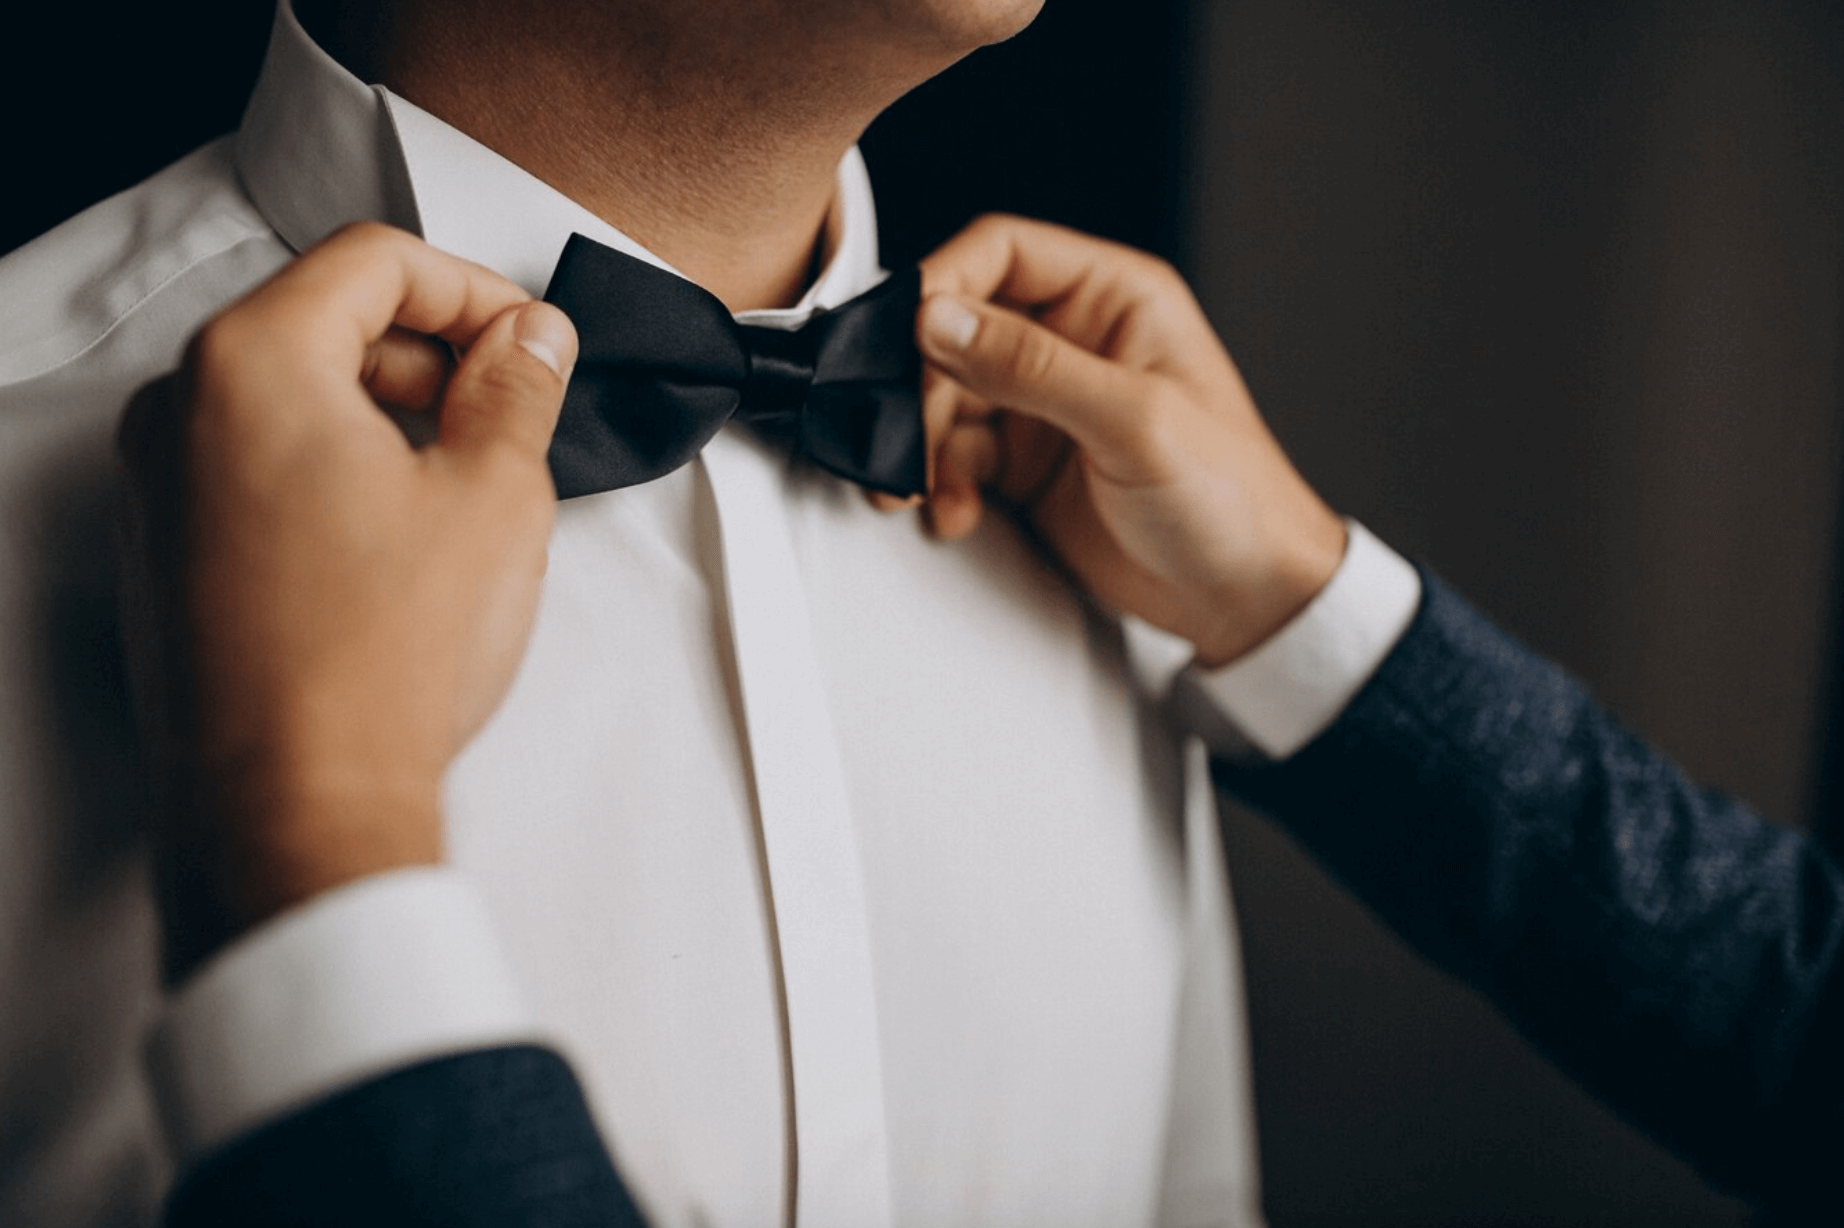 What to Wear to a Charity Event